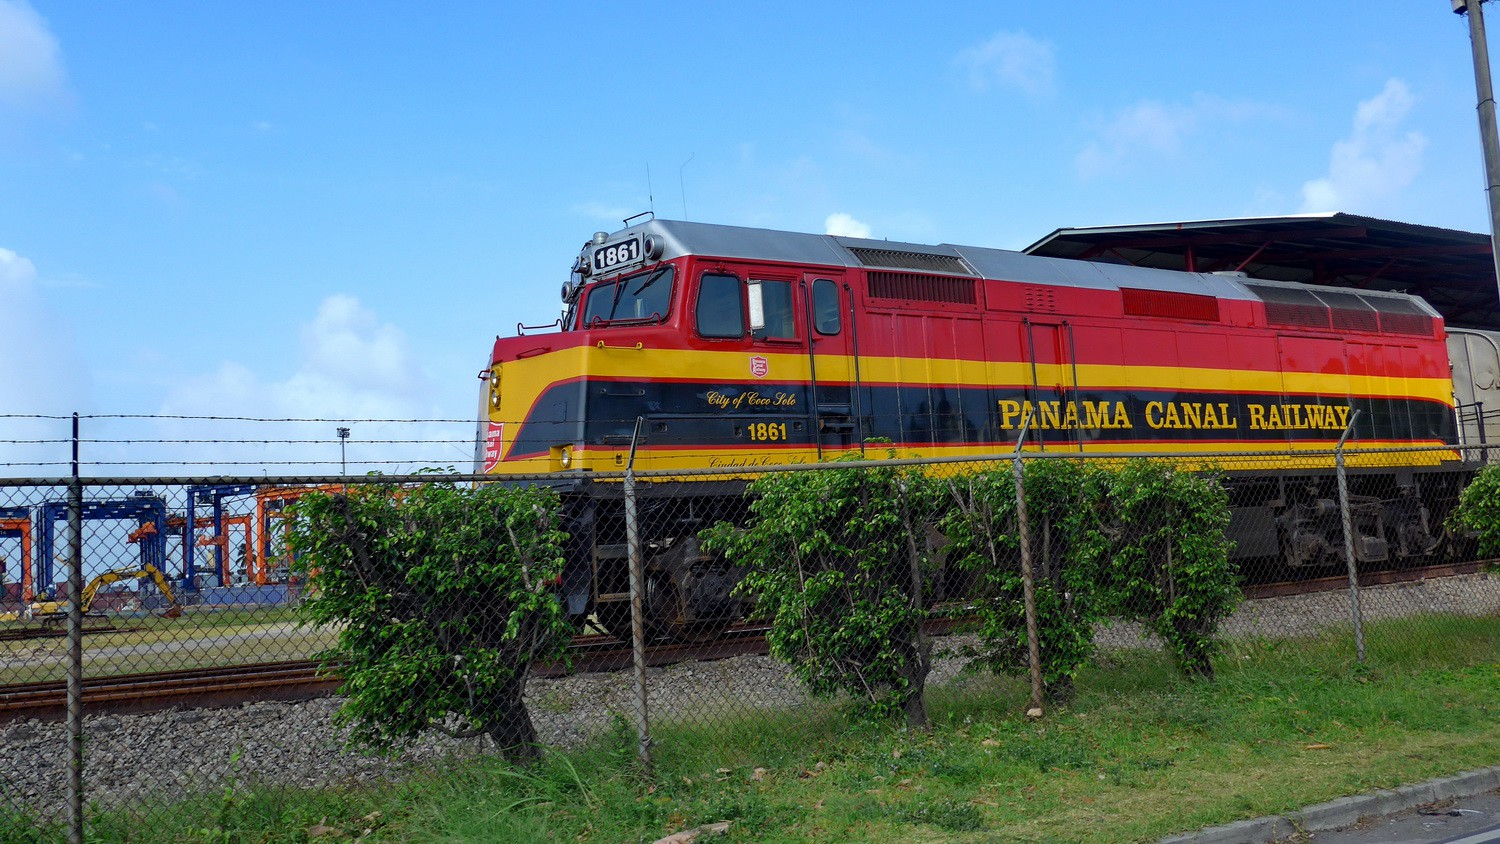 The train which operates parallel to the Panama Canal